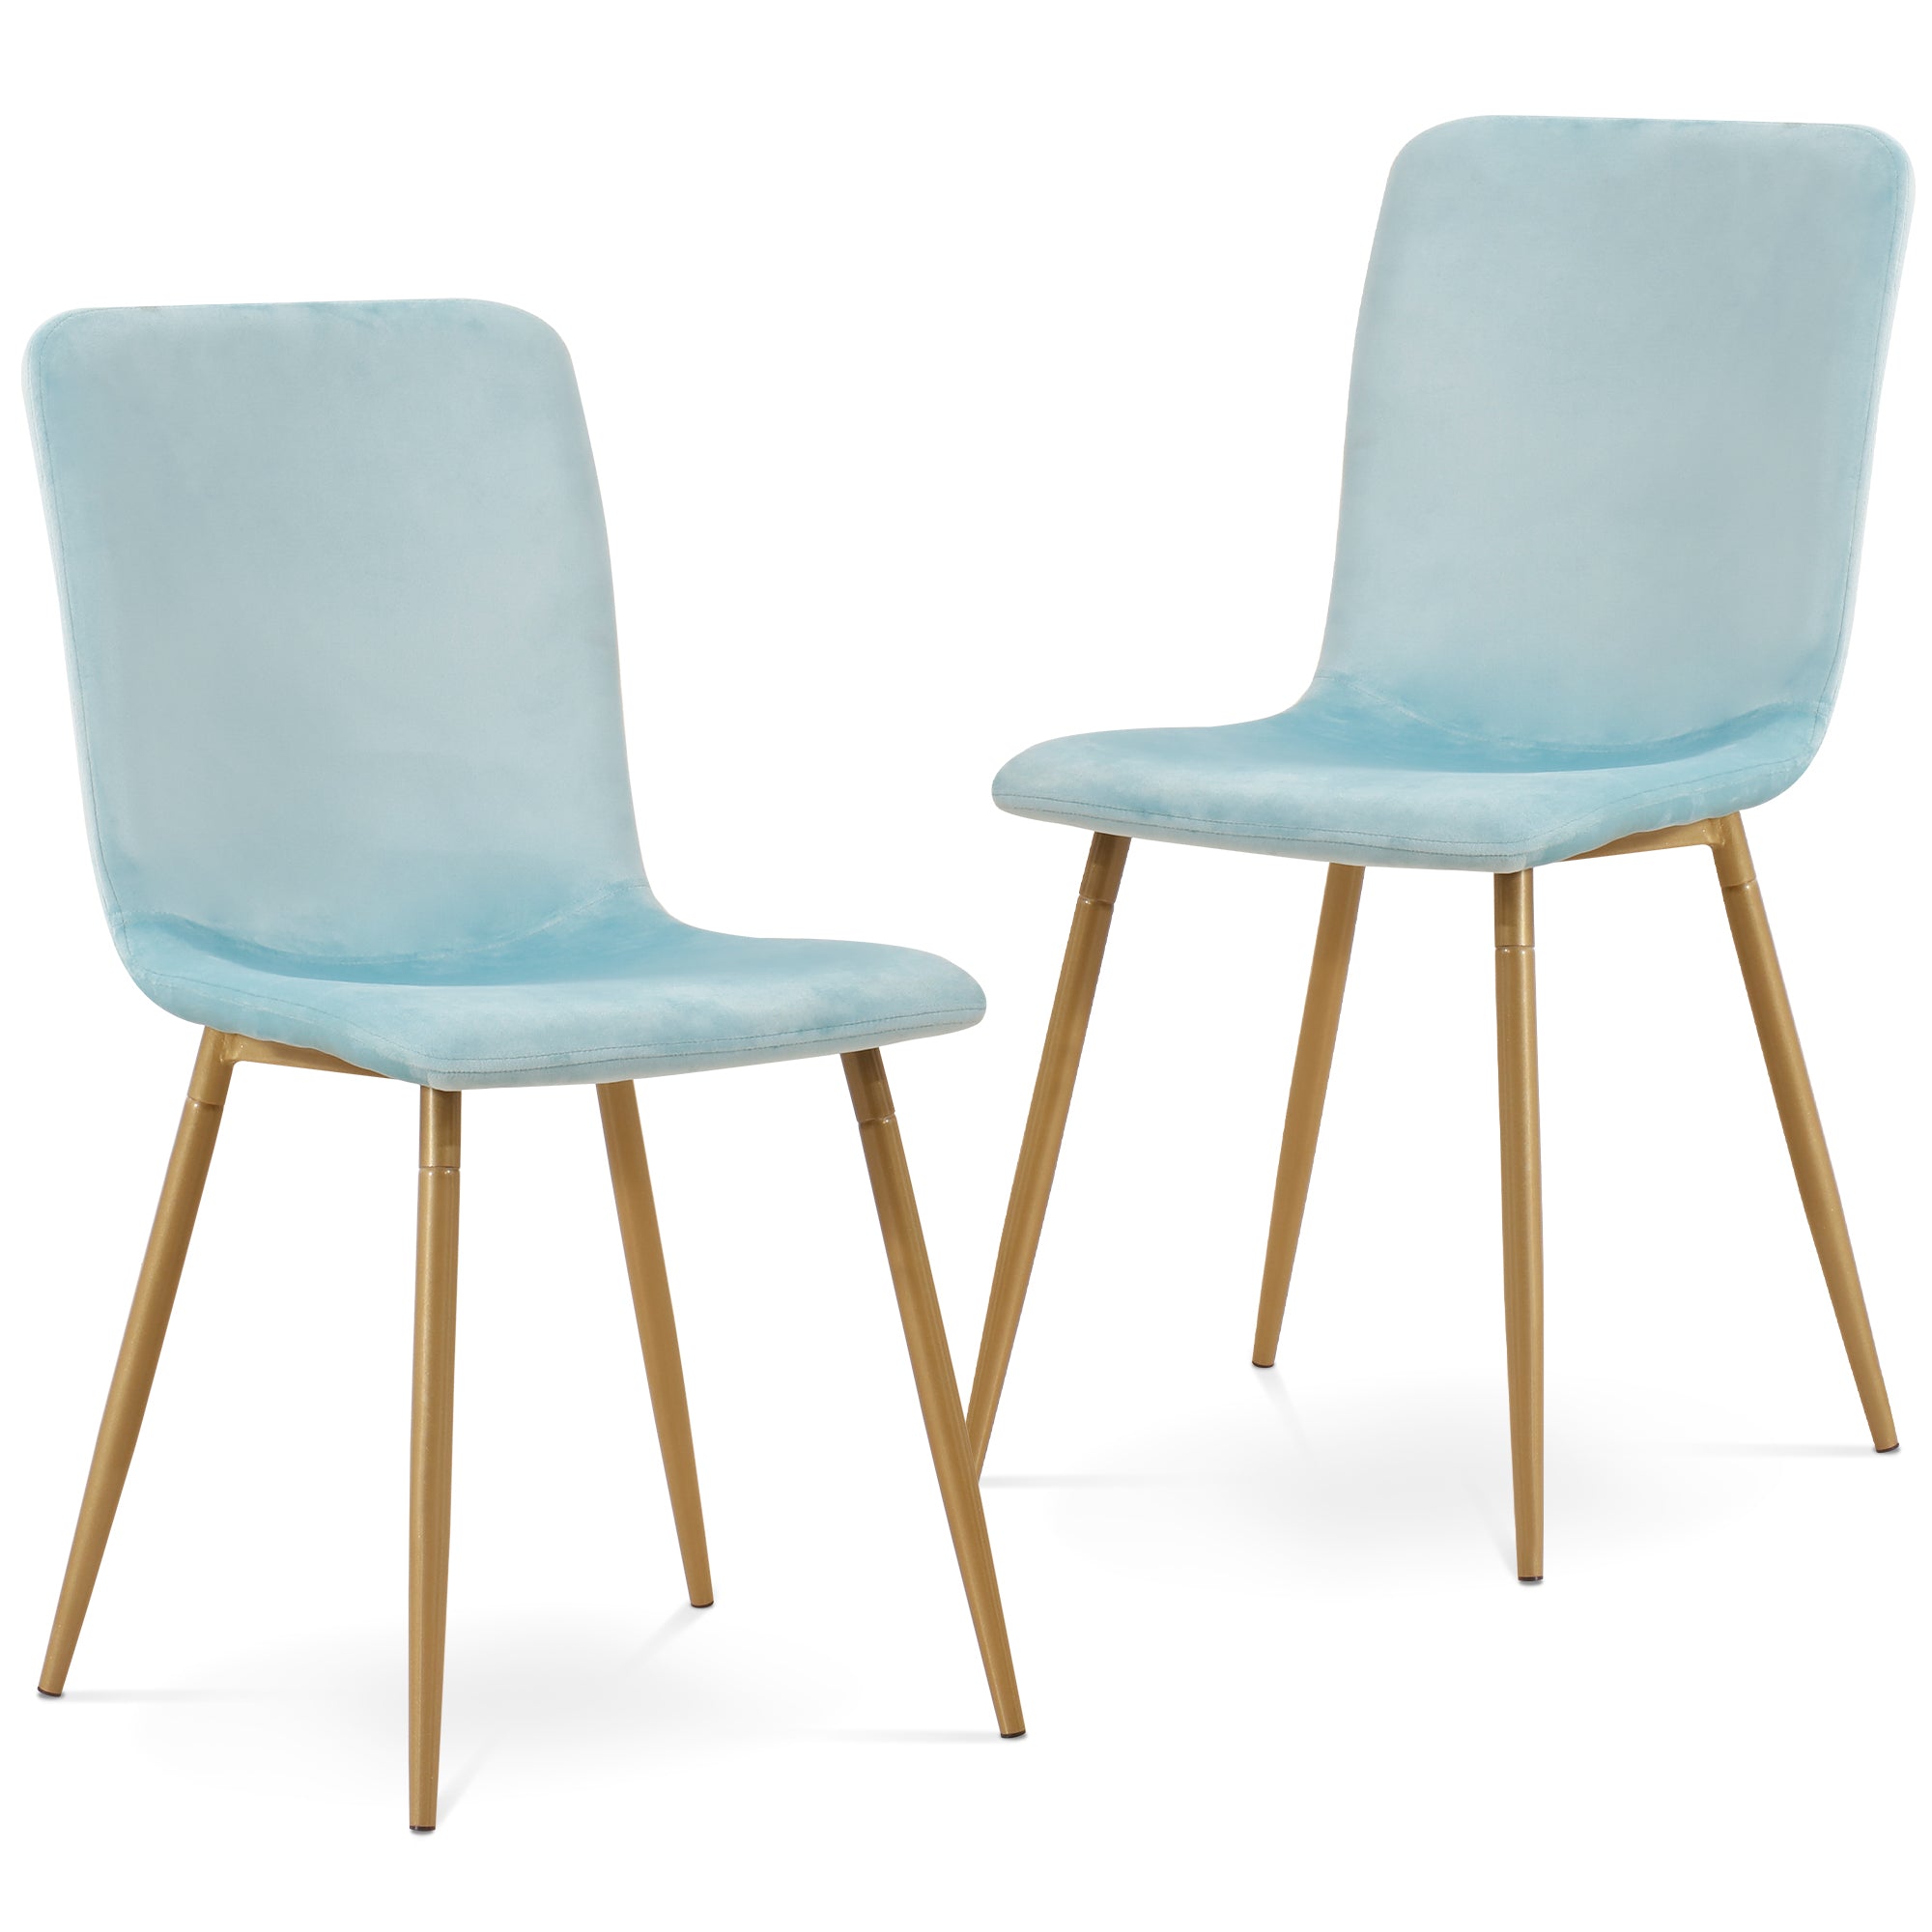 Ivinta Dining Chairs for Kitchen, Mid Century Modern Side Chairs, Set of 2